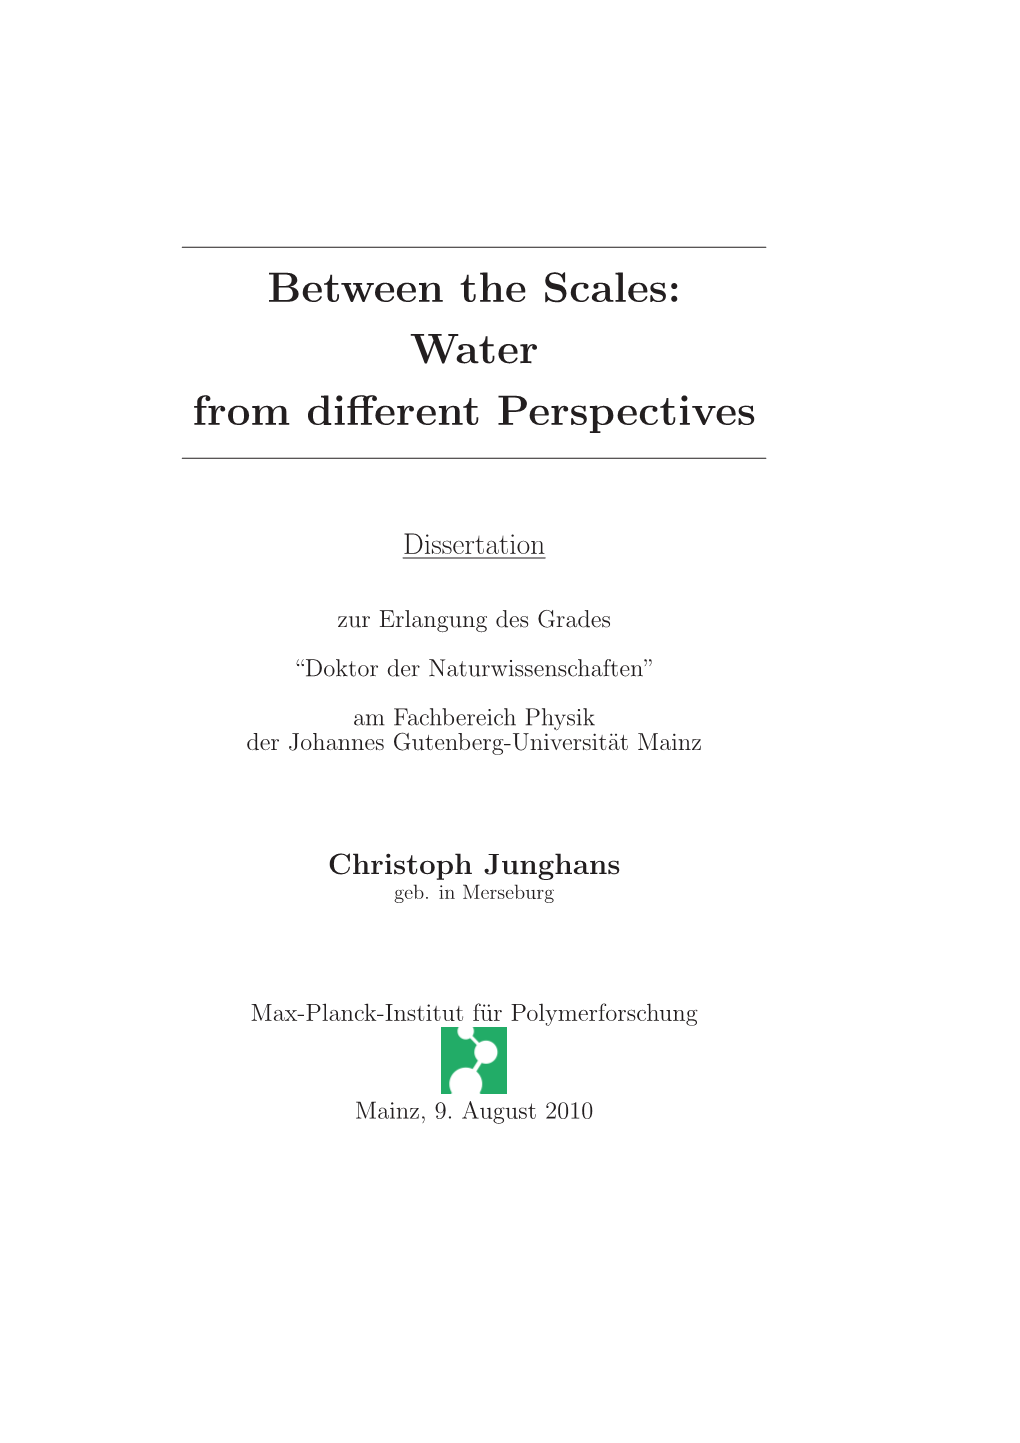 Between the Scales: Water from Different Perspectives